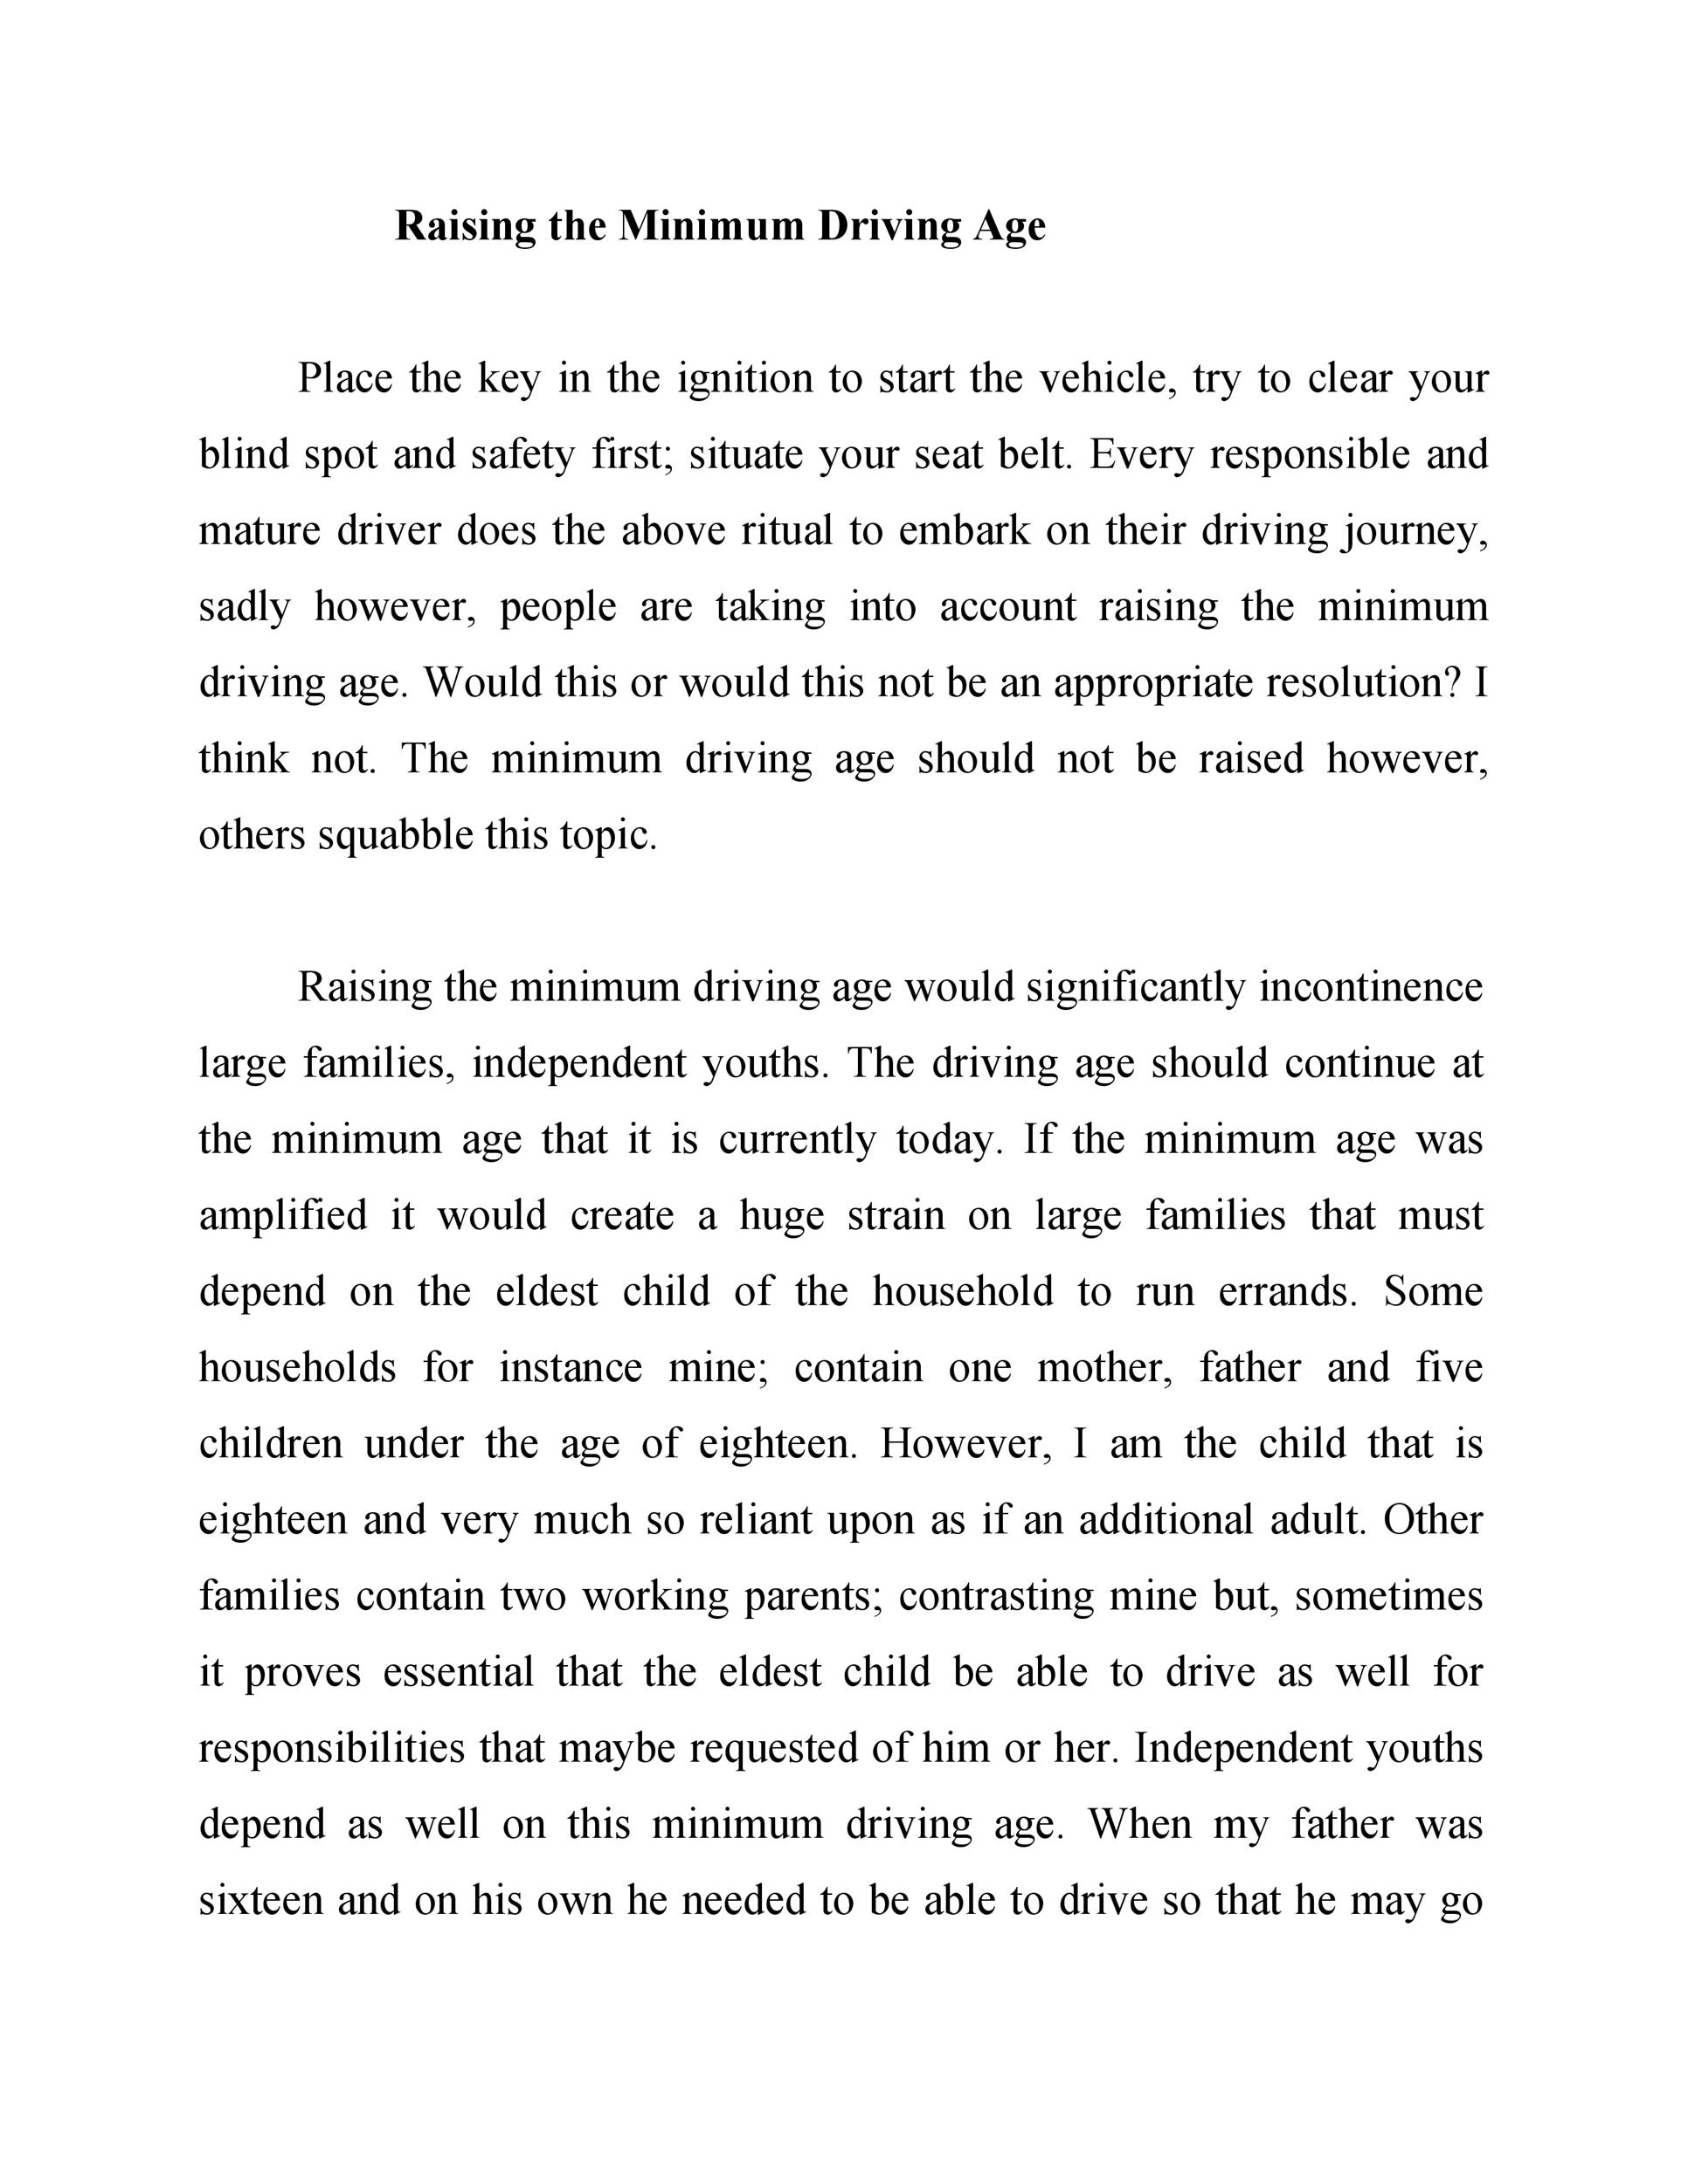 driving age should be raised essay